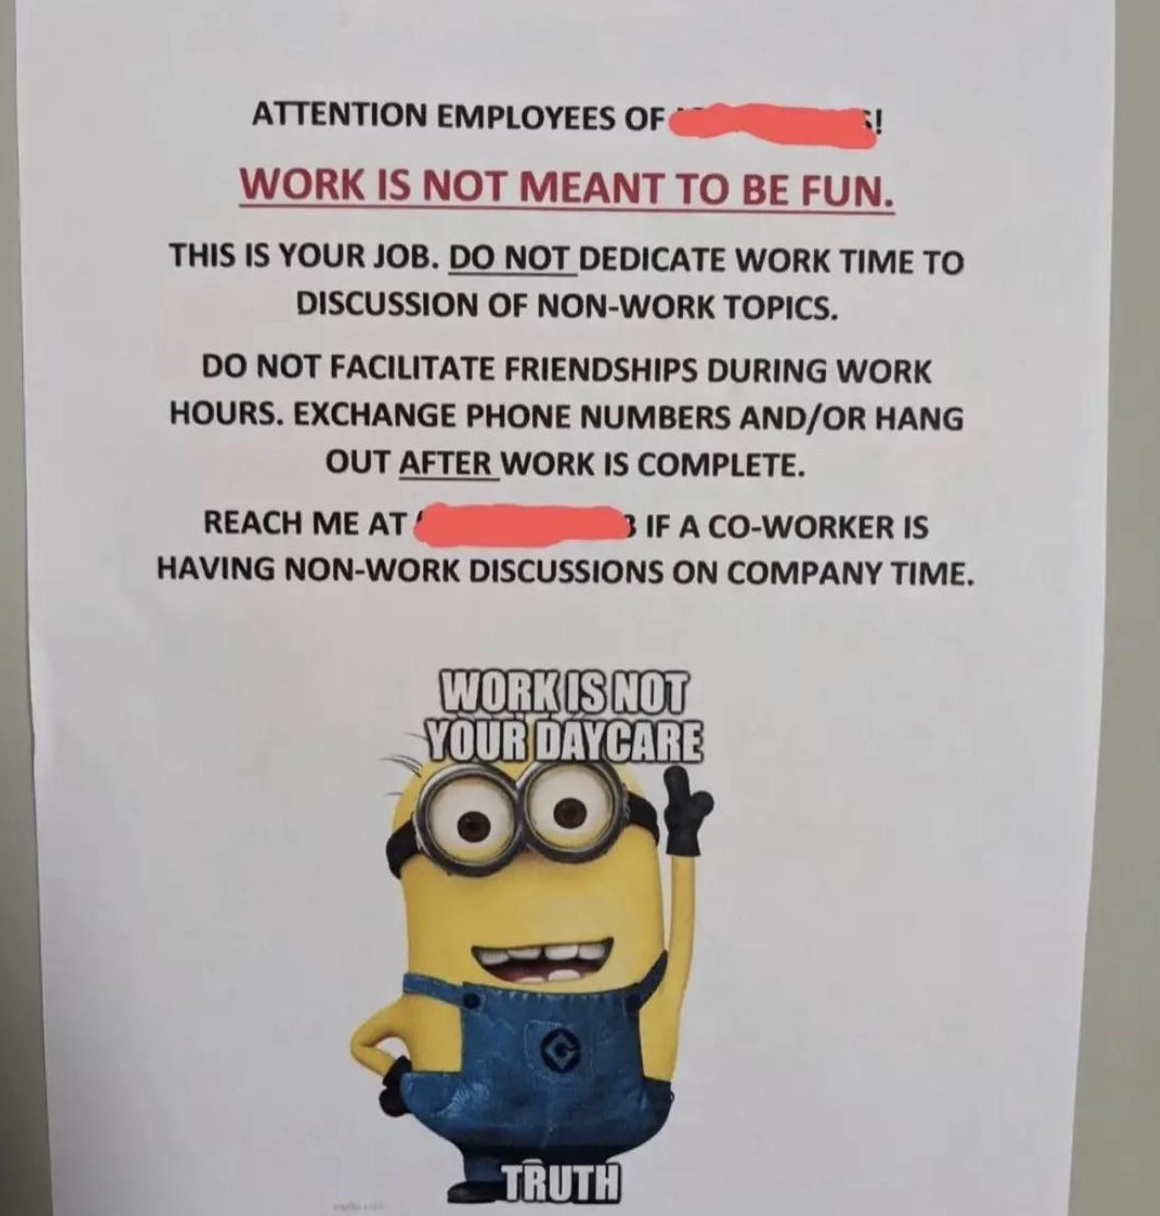 The sign tells employees not to discuss non-work topics or facilitate friendships and asks people to report any coworker having non-work discussions